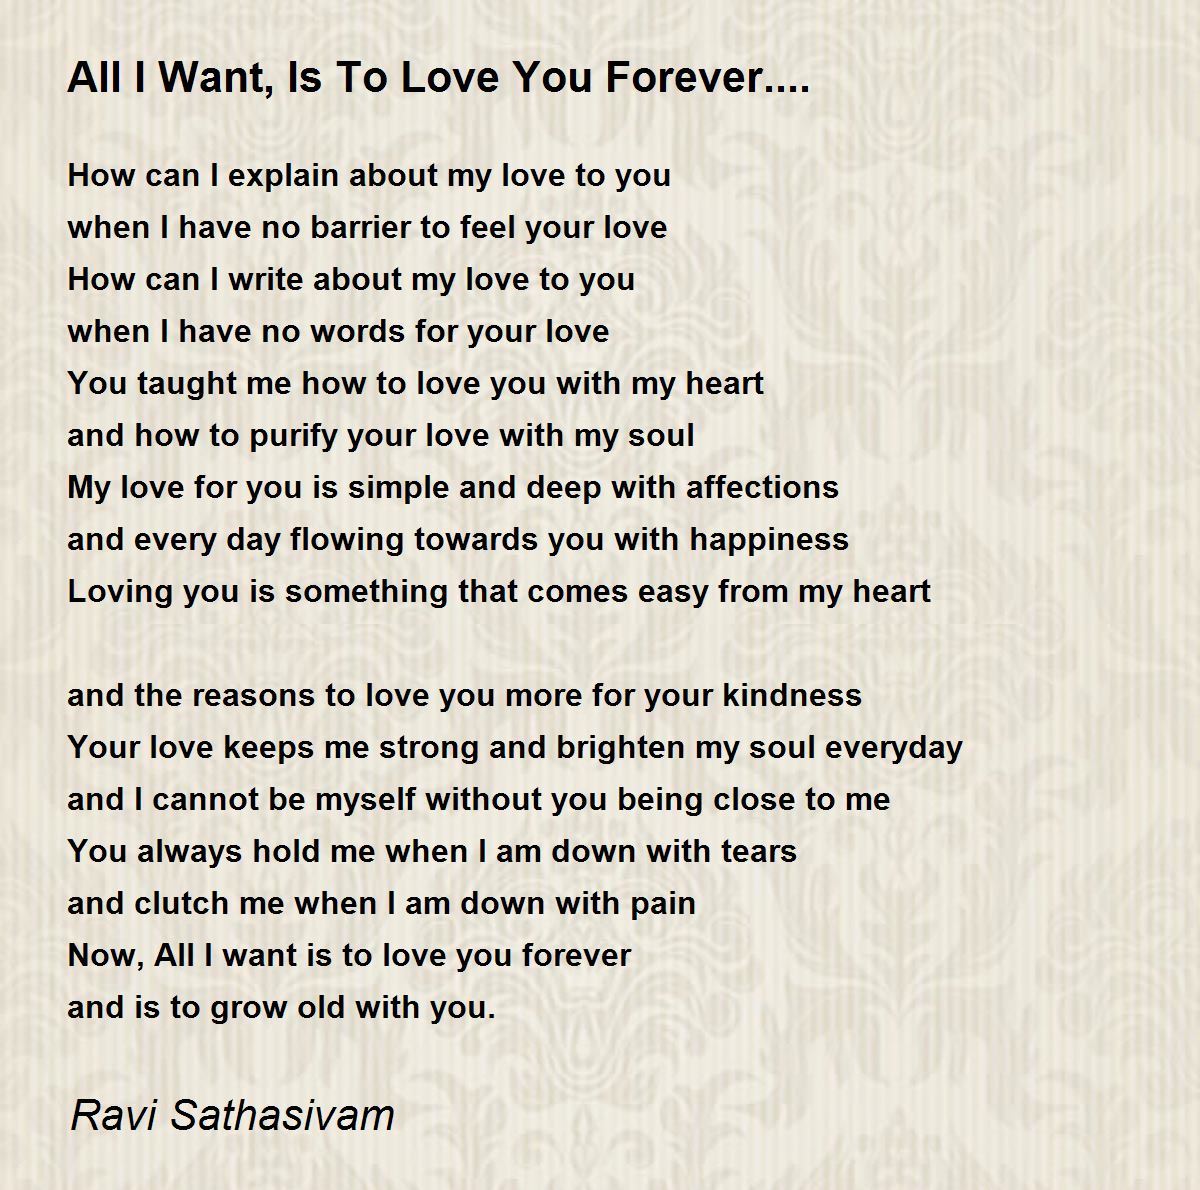 All I Want, Is To Love You Forever.... Poem by Ravi ...